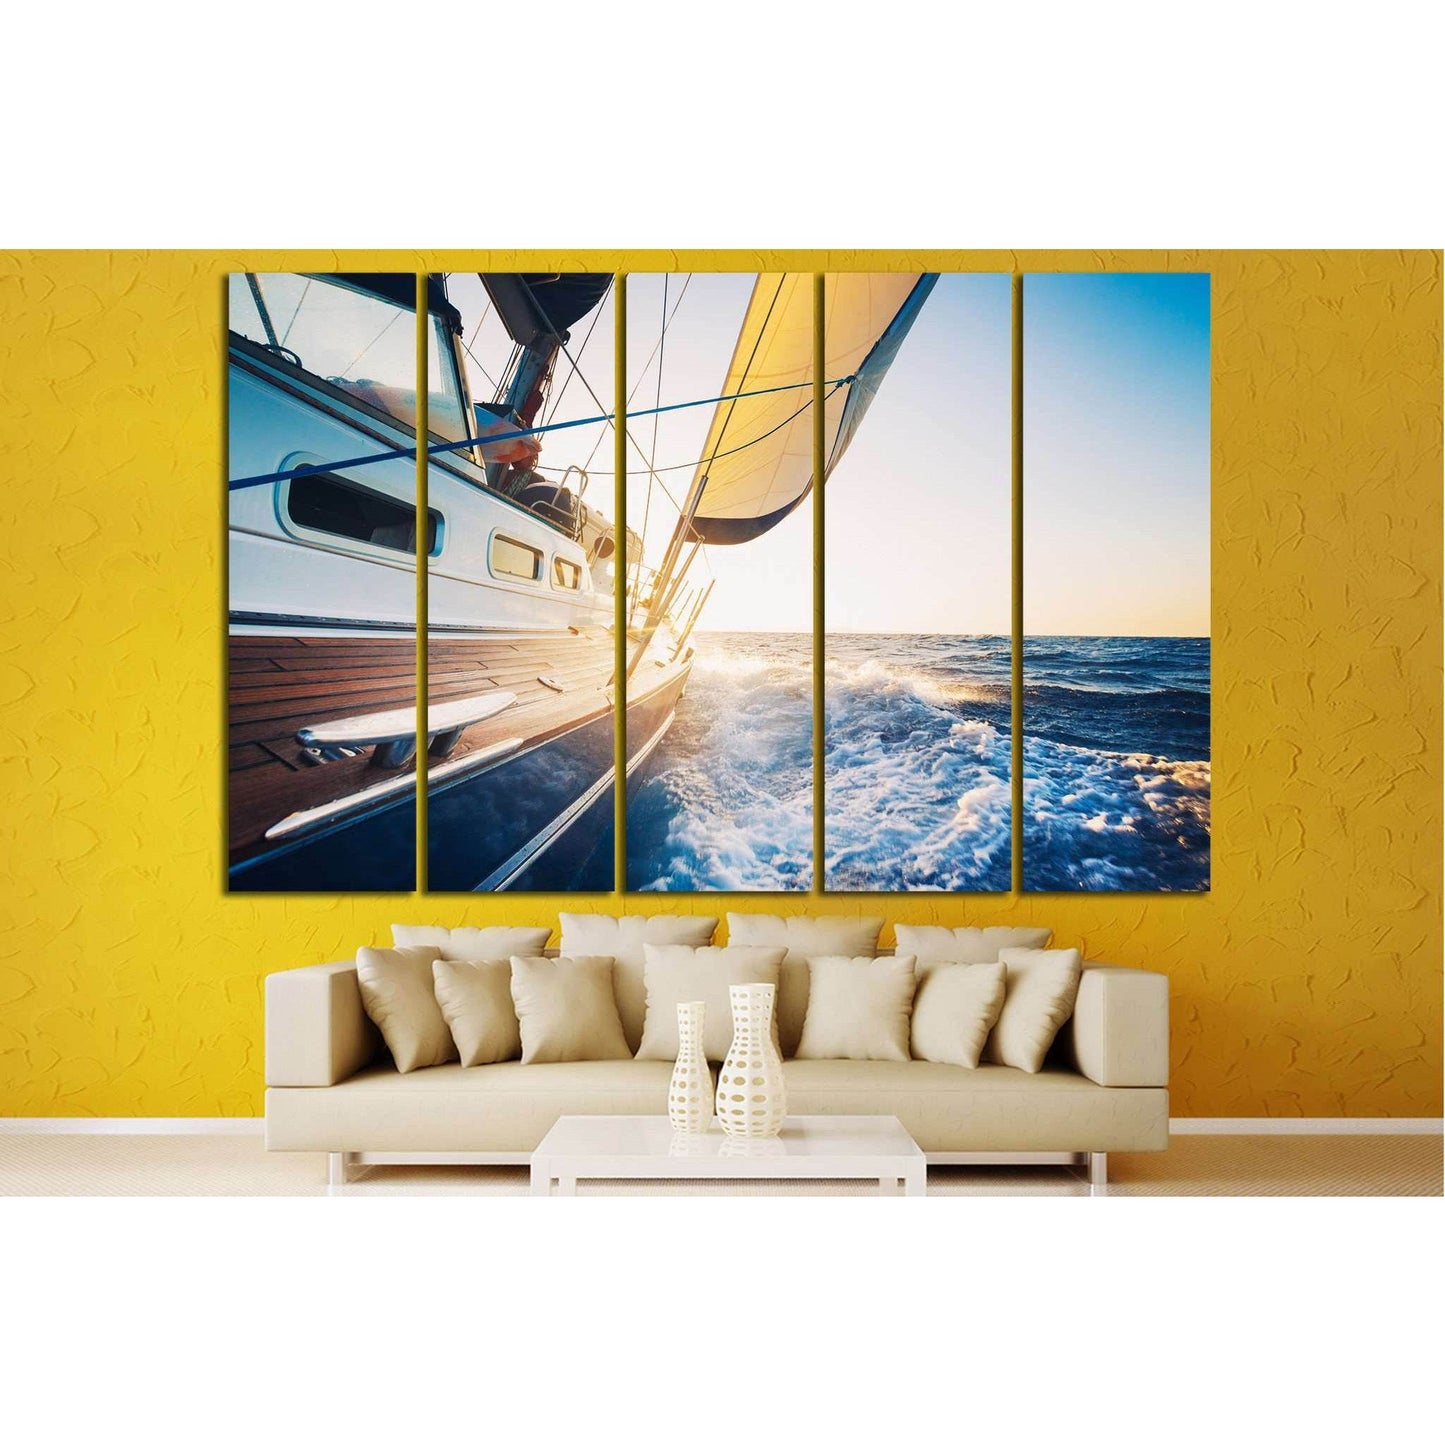 Yach in the Sea Canvas Print - Wall Art for Home & Office DecorCharming yacht wall art printed on thick natural canvas. Great choice to decorate a large wall in an Office or Home interior. Zellart Canvas Prints